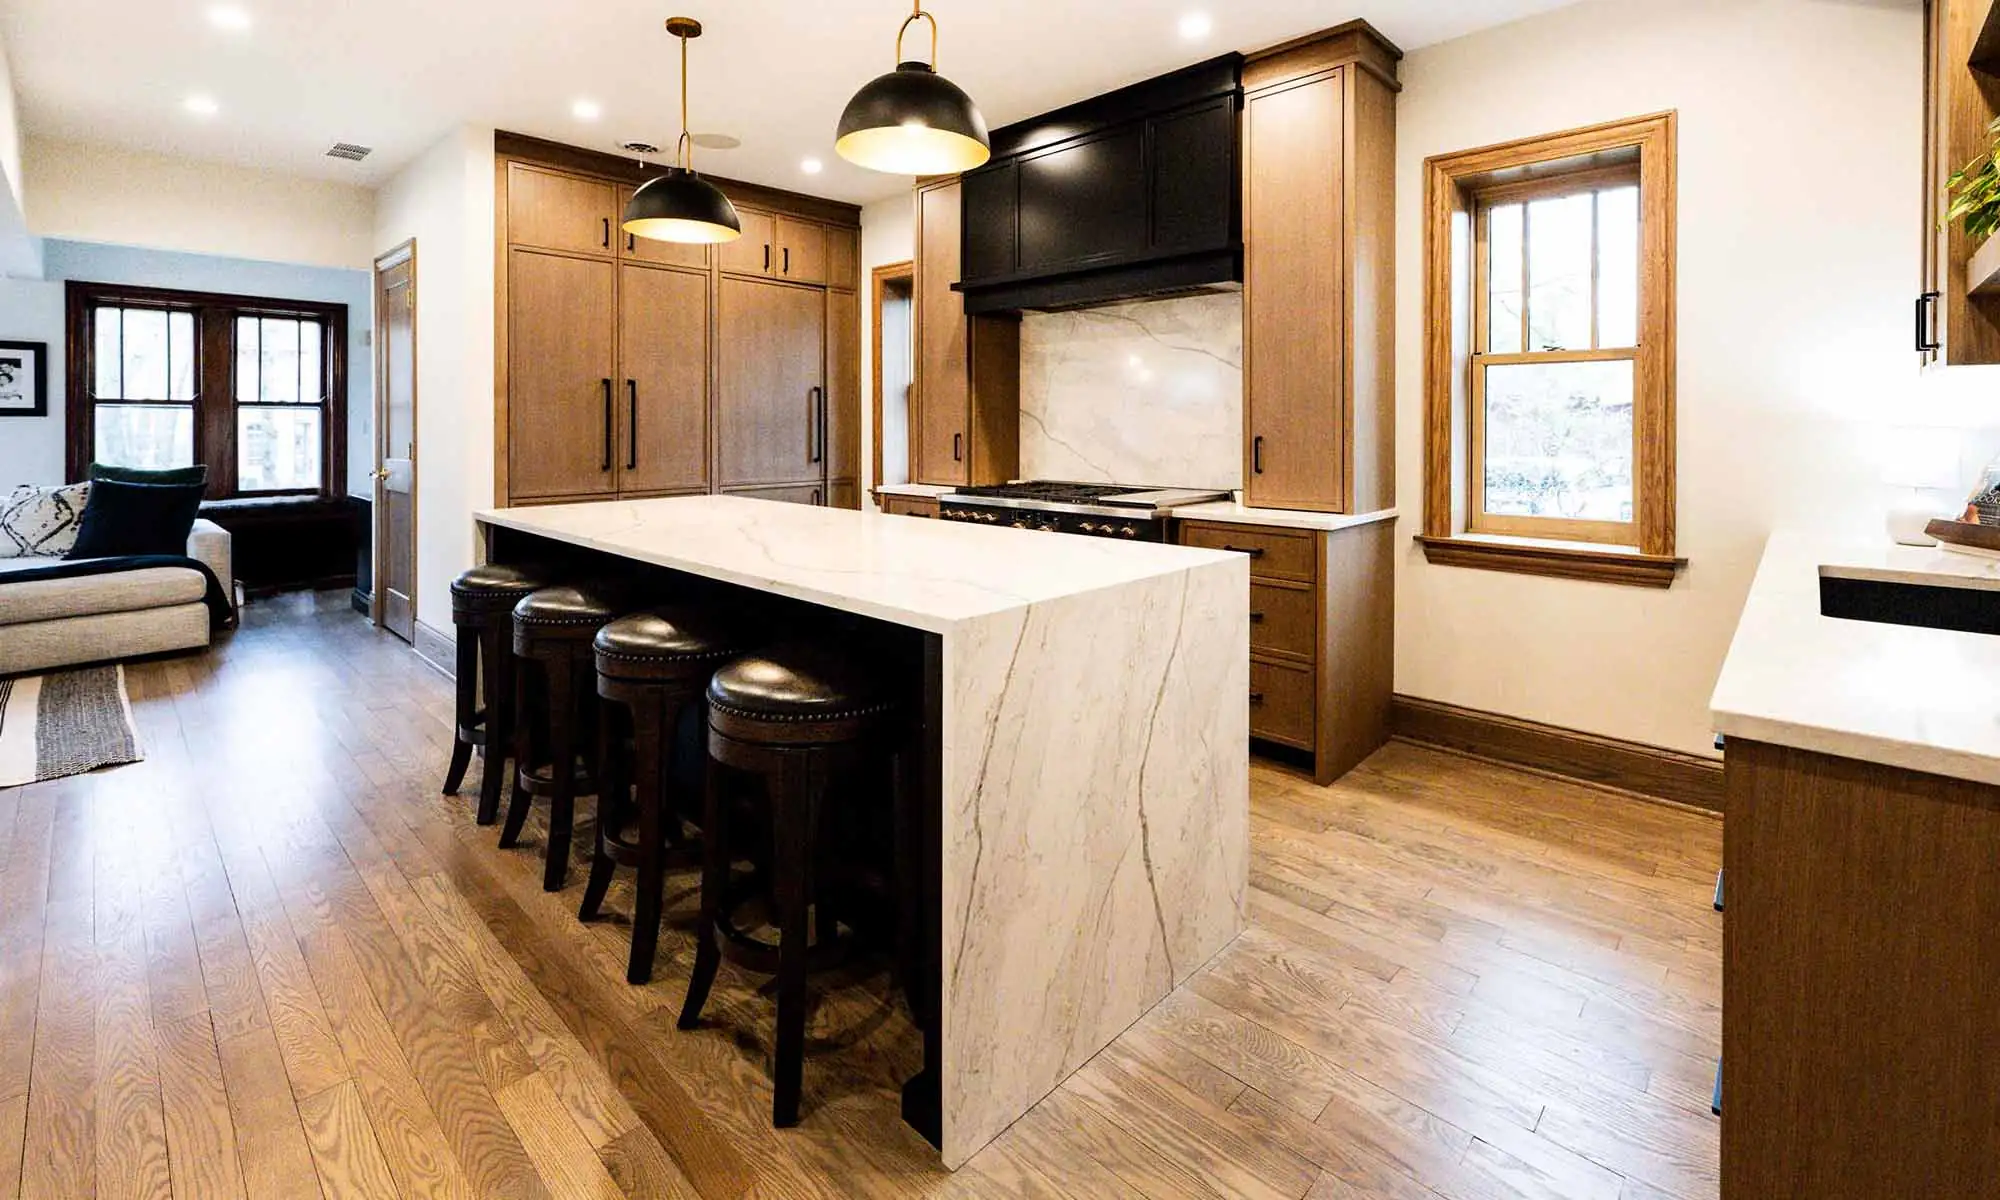 view of luxury kitchen remodel with windows flanking large range wall and white oak cabinetry